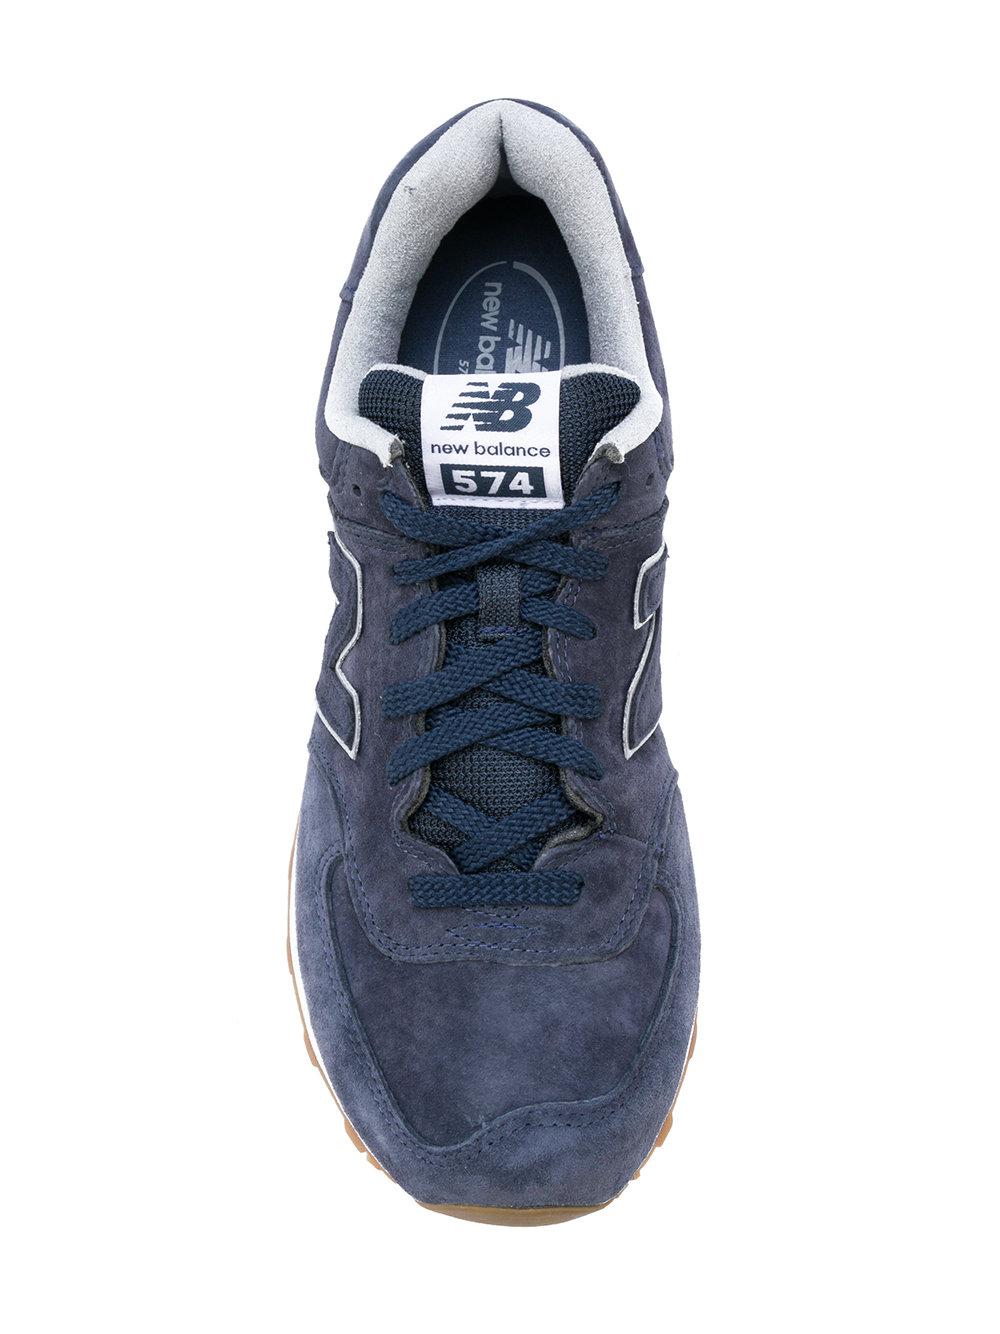 New Balance Suede Gum Pack 574 Sneakers in Blue for Men - Lyst